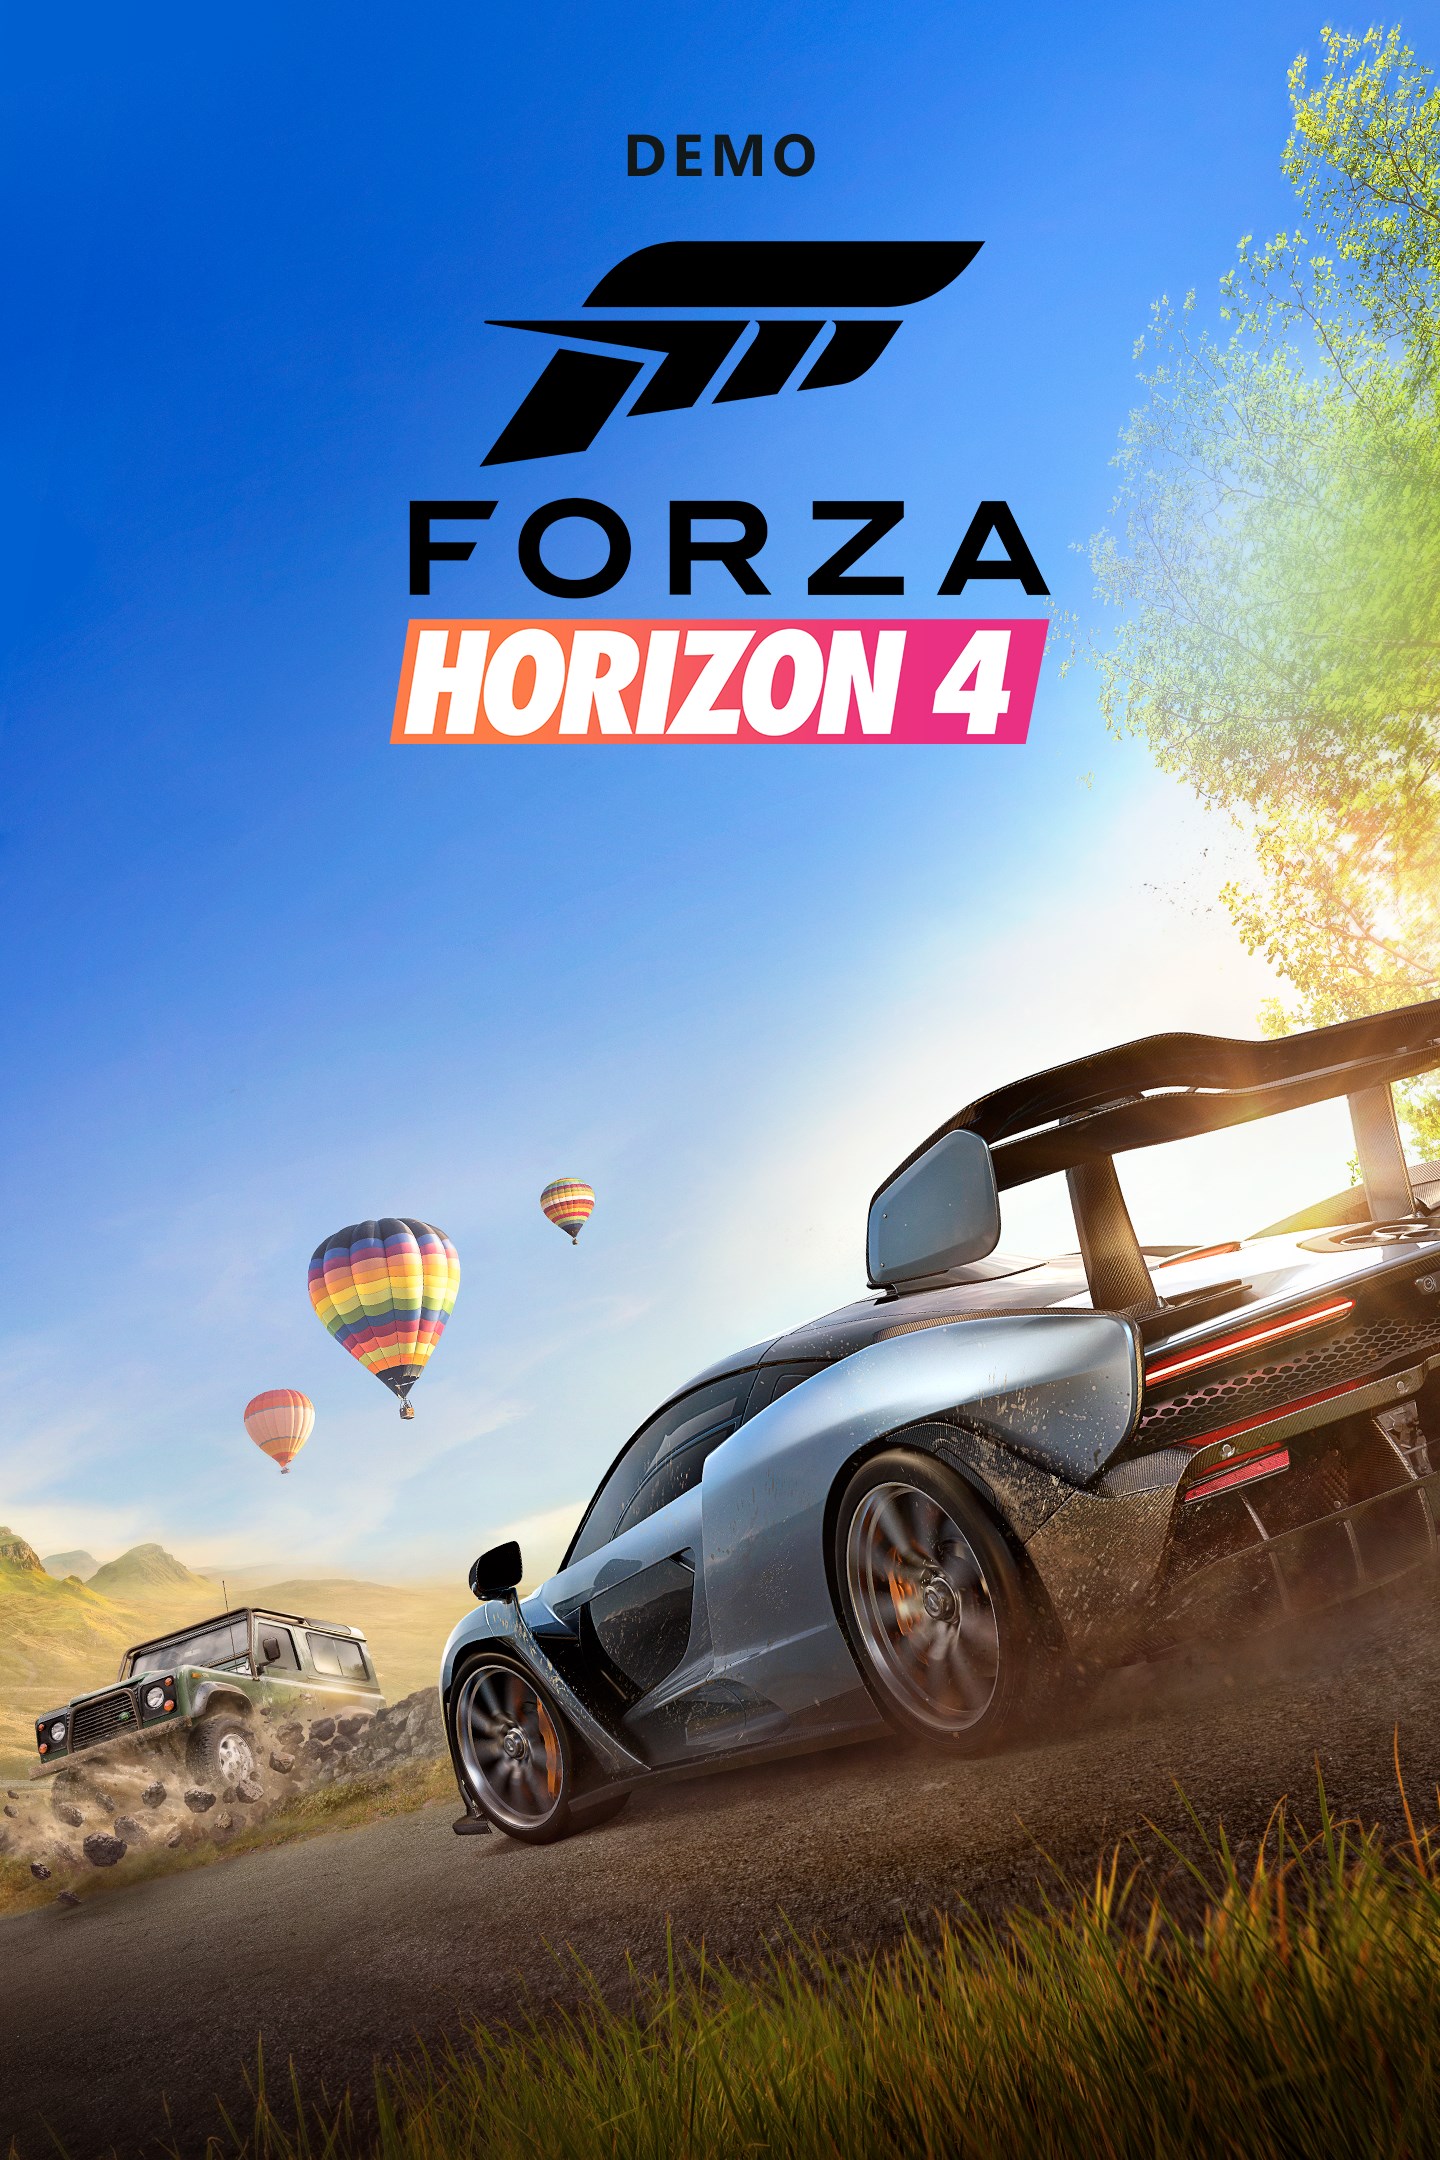 when is the forza horizon 4 demo coming out